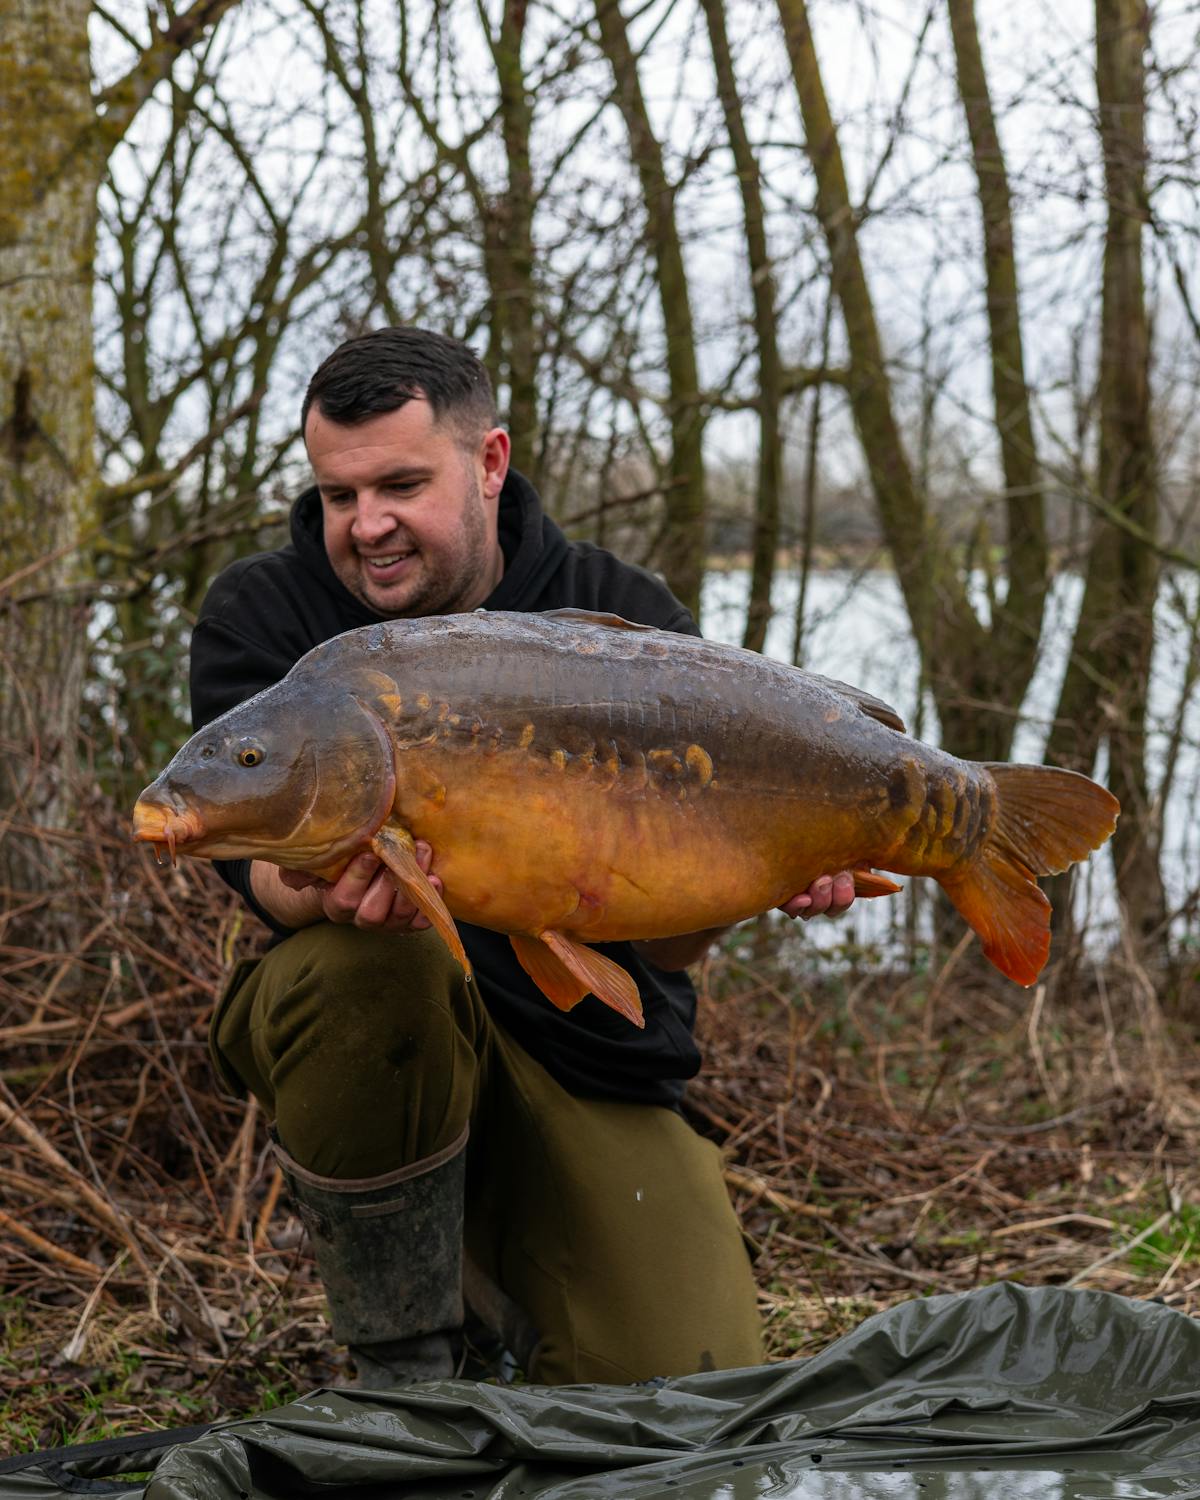 Tom Maker has one of his best winter sessions EVER!